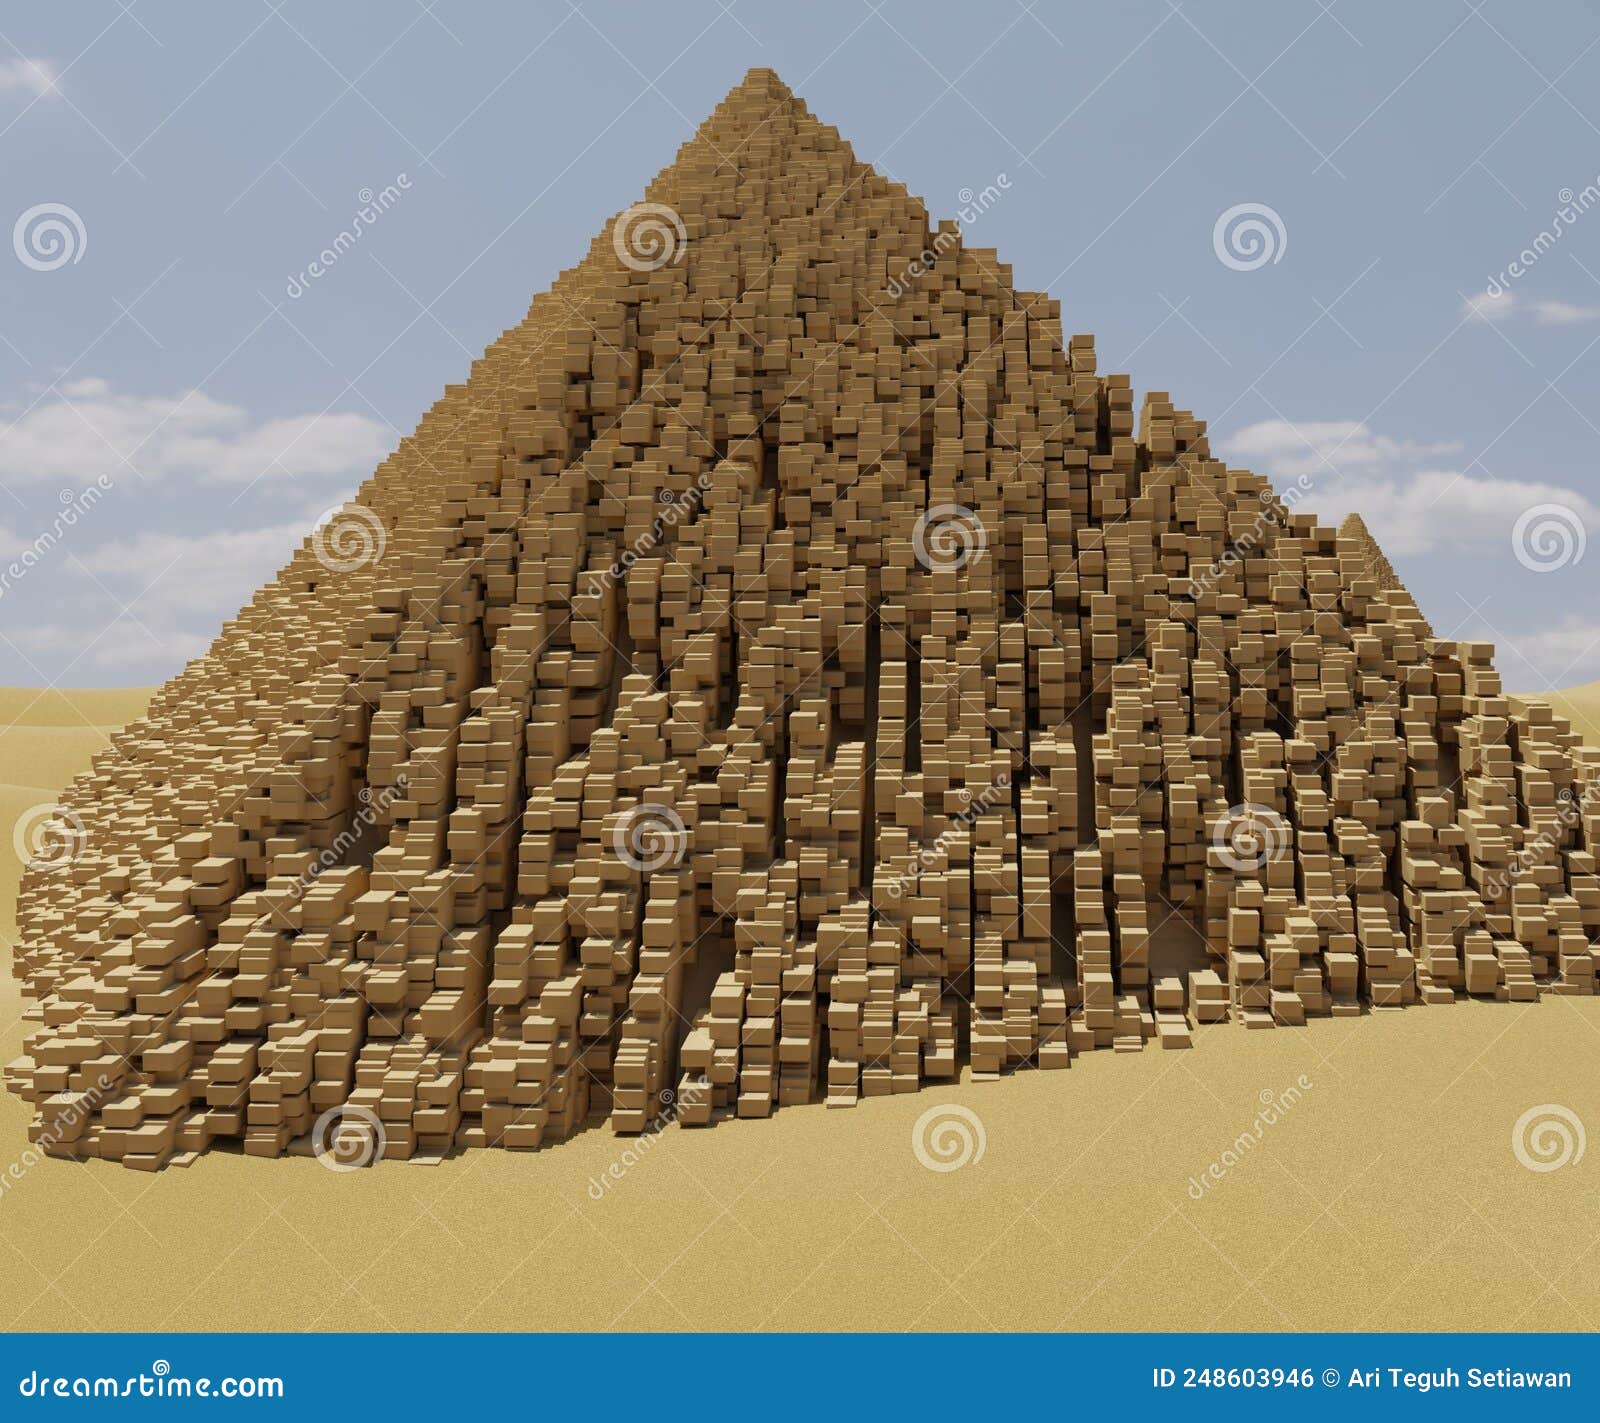 Crumbling or Ruins Pyramid from Egypt on the Desert Stock Illustration ...